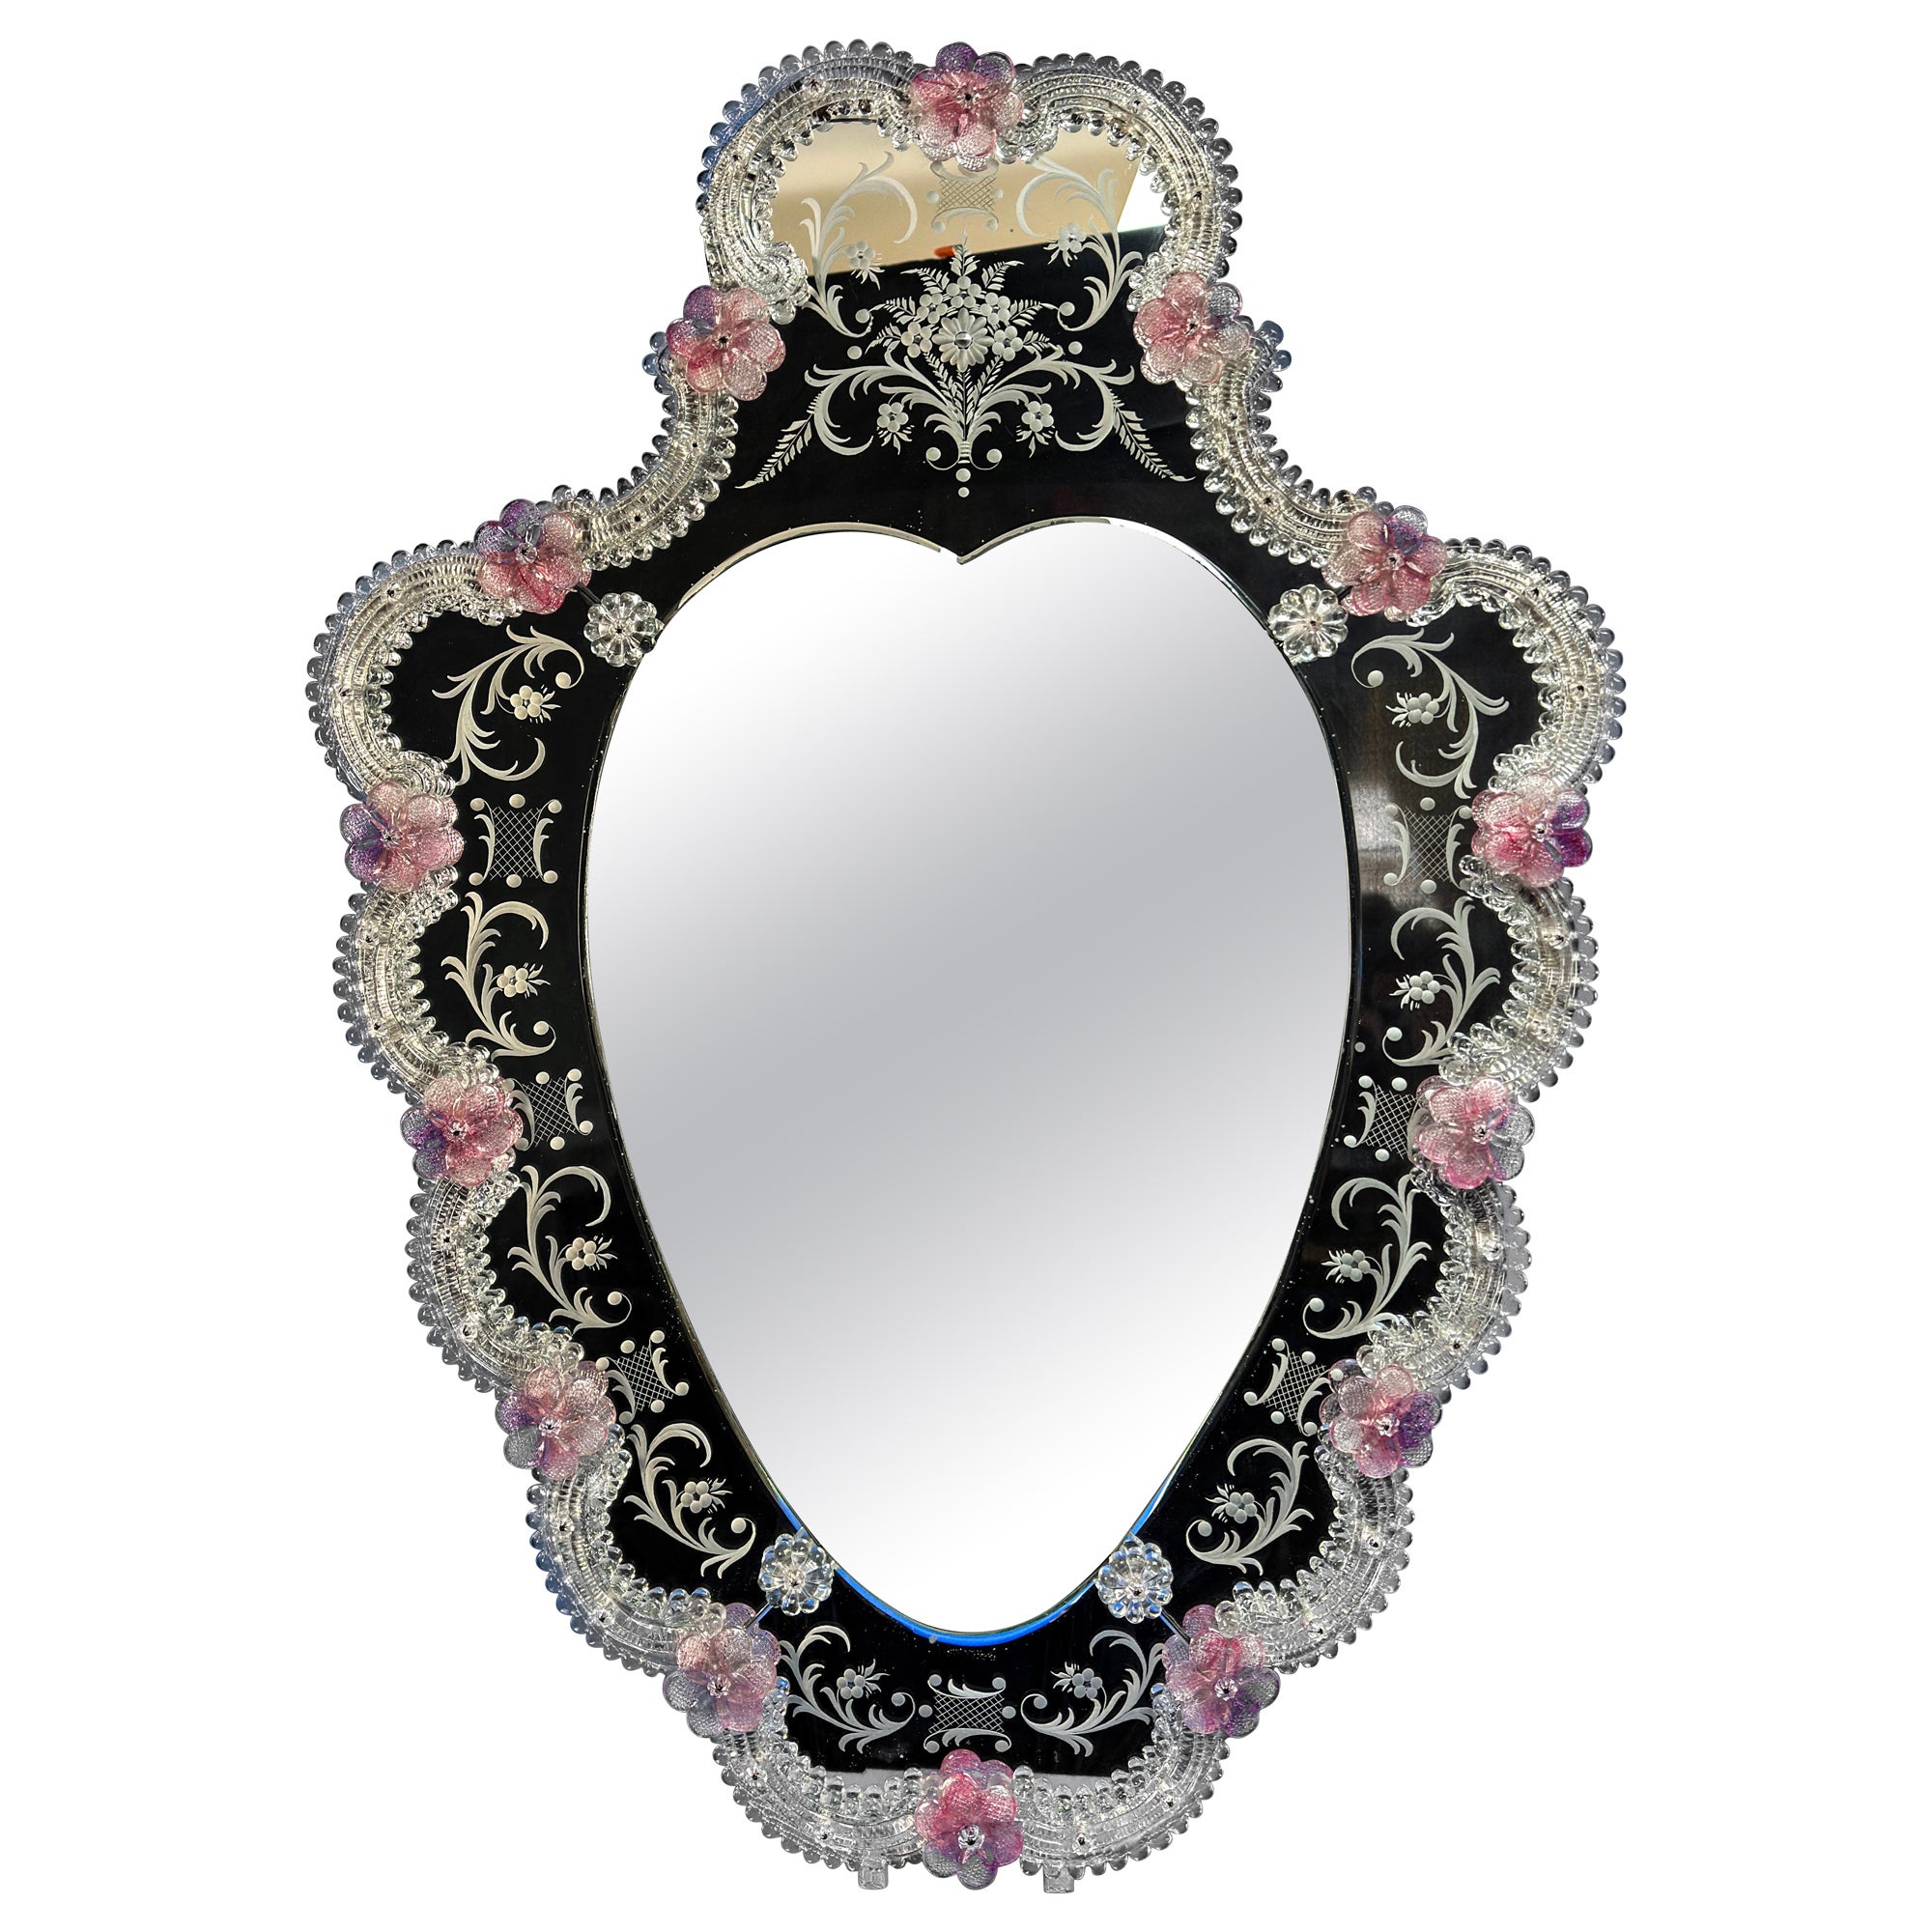 1960s Venetian Mirror, Heart Shaped Frame with Pink Murano Glass Flowers For Sale